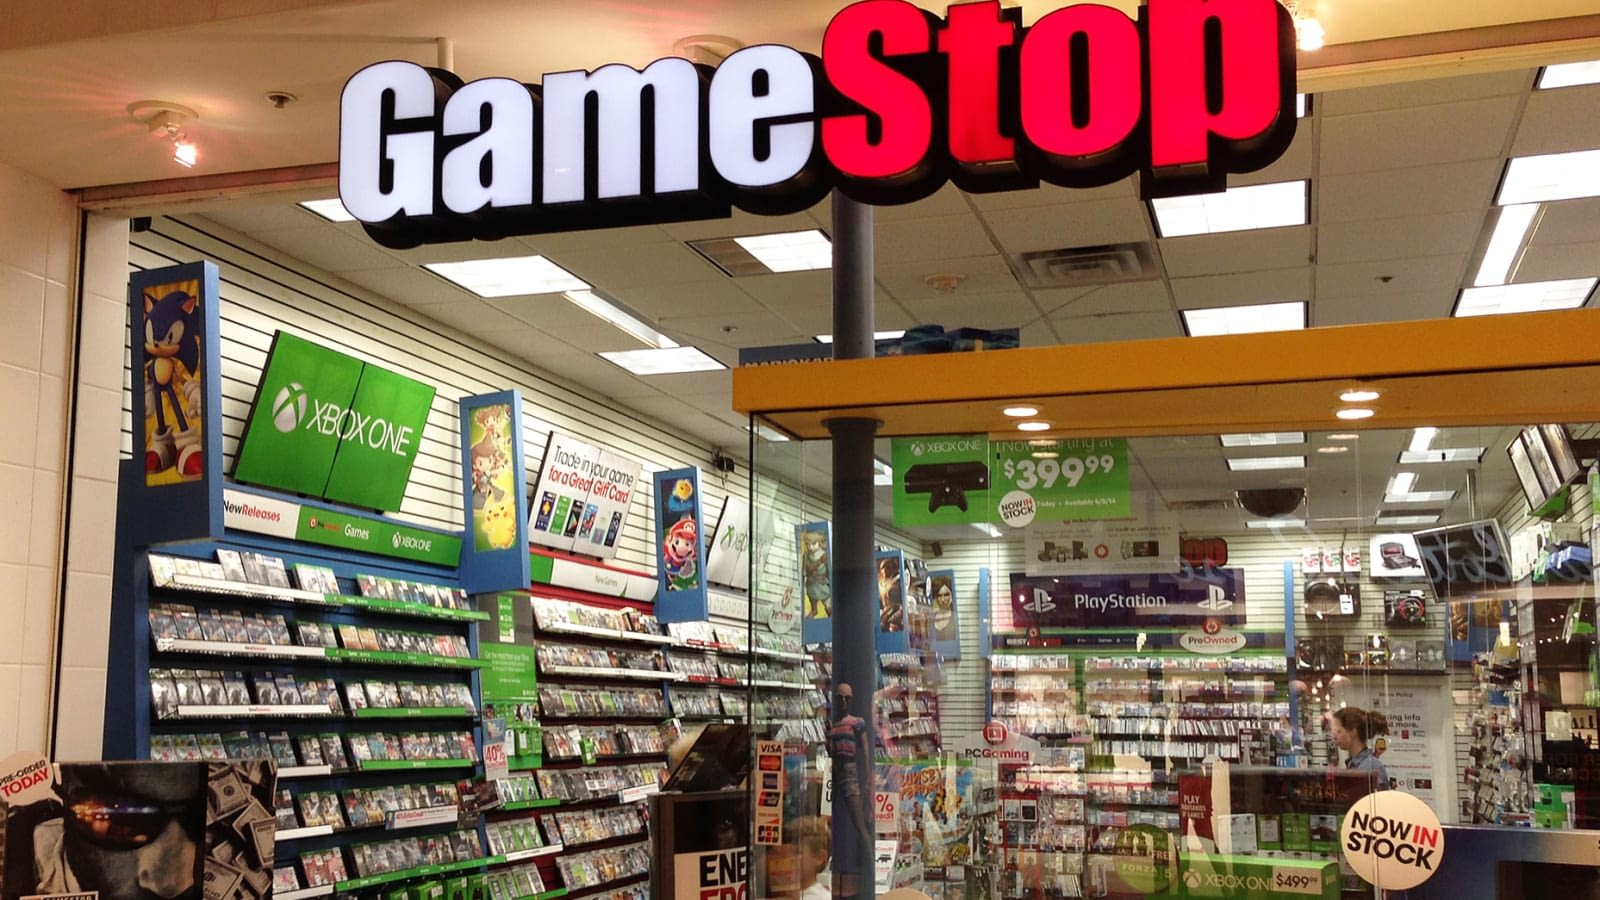 GameStop partners with Microsoft to revitalize stores | GameZone